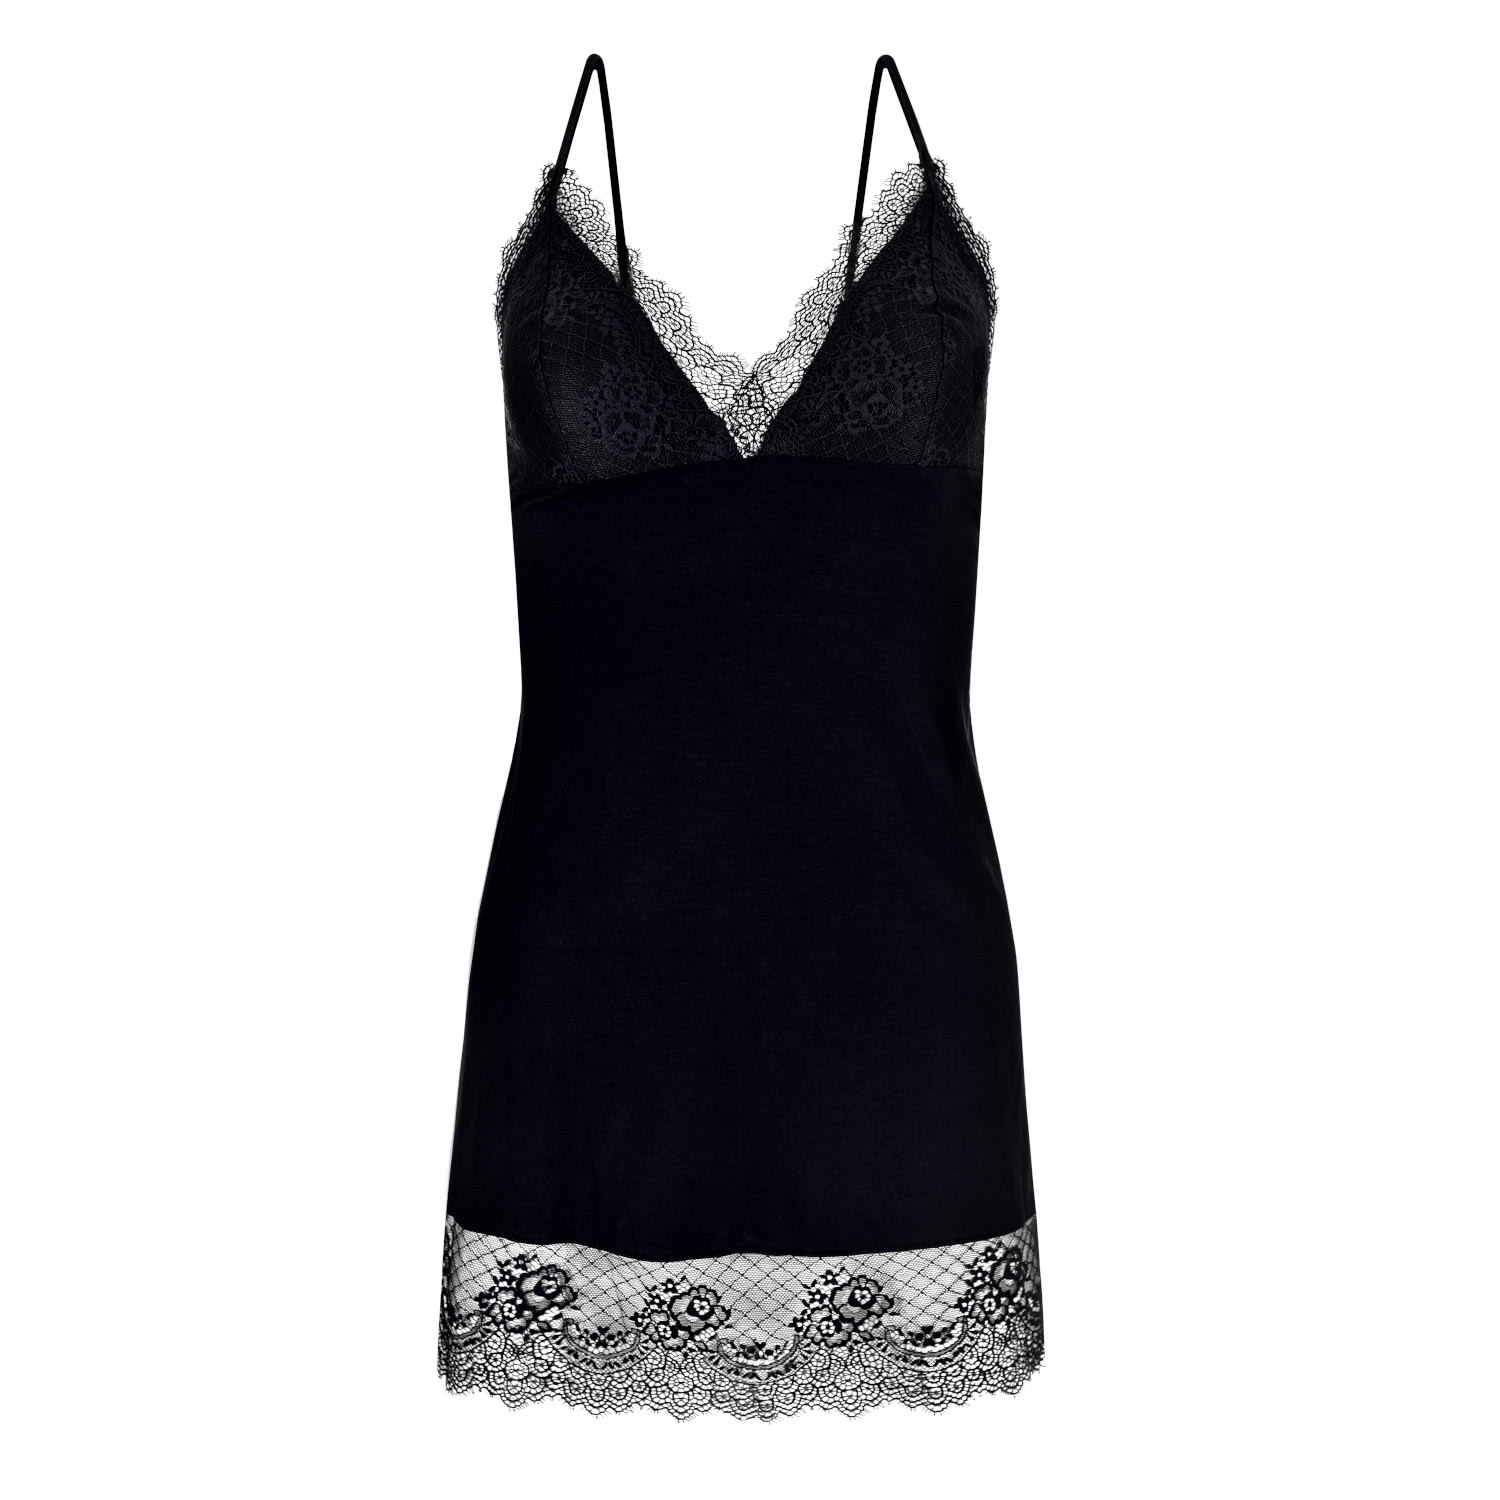 Women’s Black Lace Back Chemise Nightdress - Breathable Viscose & Soft Lace Extra Small Oh!Zuza Night & Day